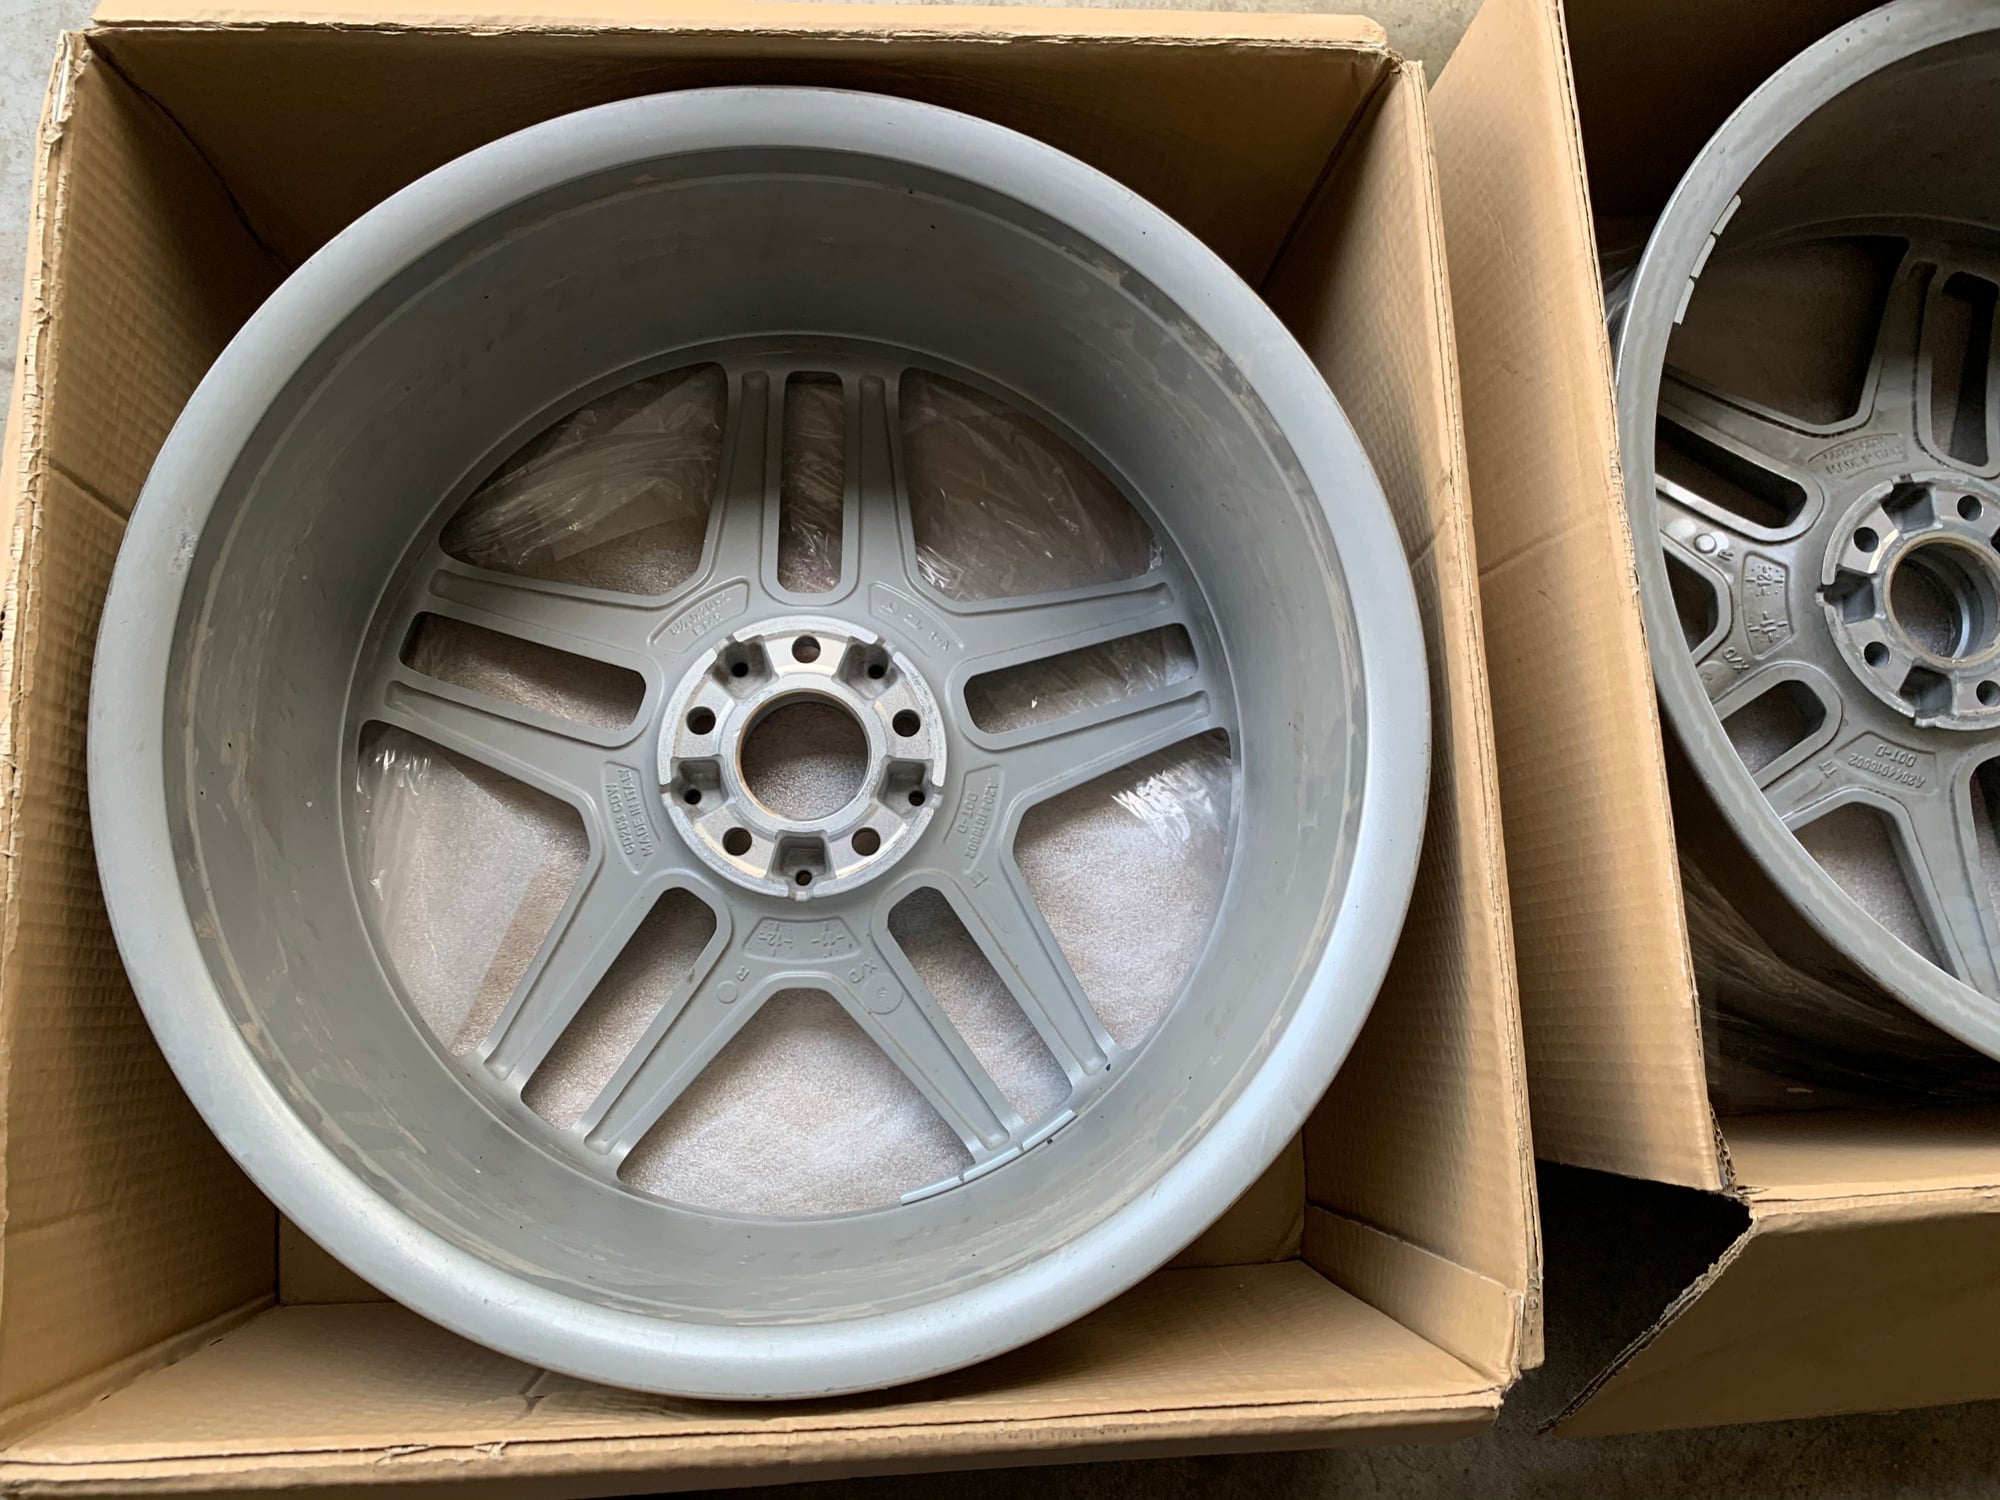 Wheels and Tires/Axles - 20" AMG GLK350 wheels x (2) Chicagoland $200 FTF - Used - 2010 to 2015 Mercedes-Benz GLK350 - St Charles, IL 60175, United States